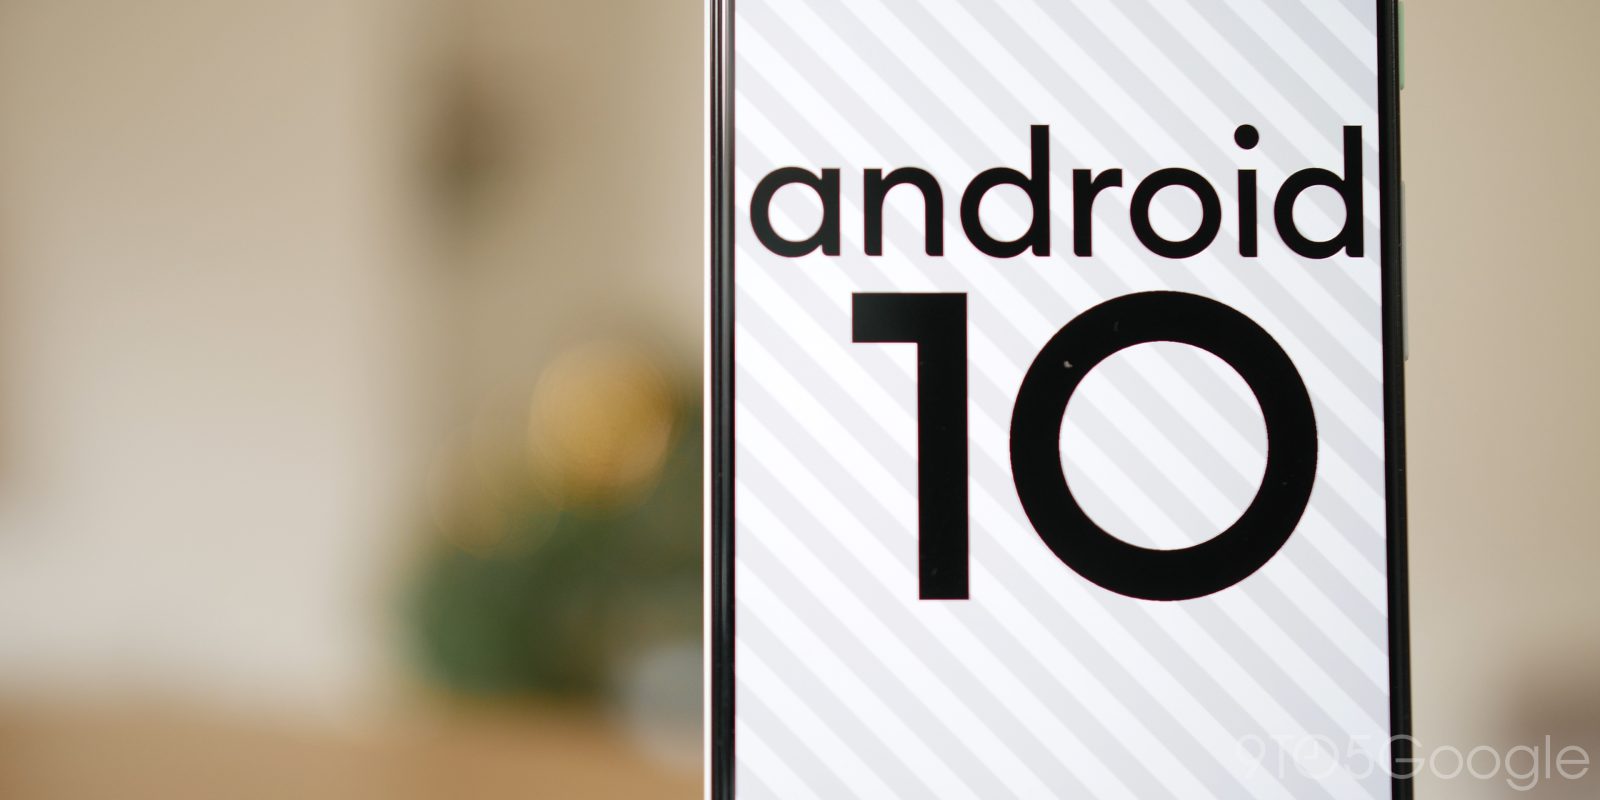 Android 10 new features and changes